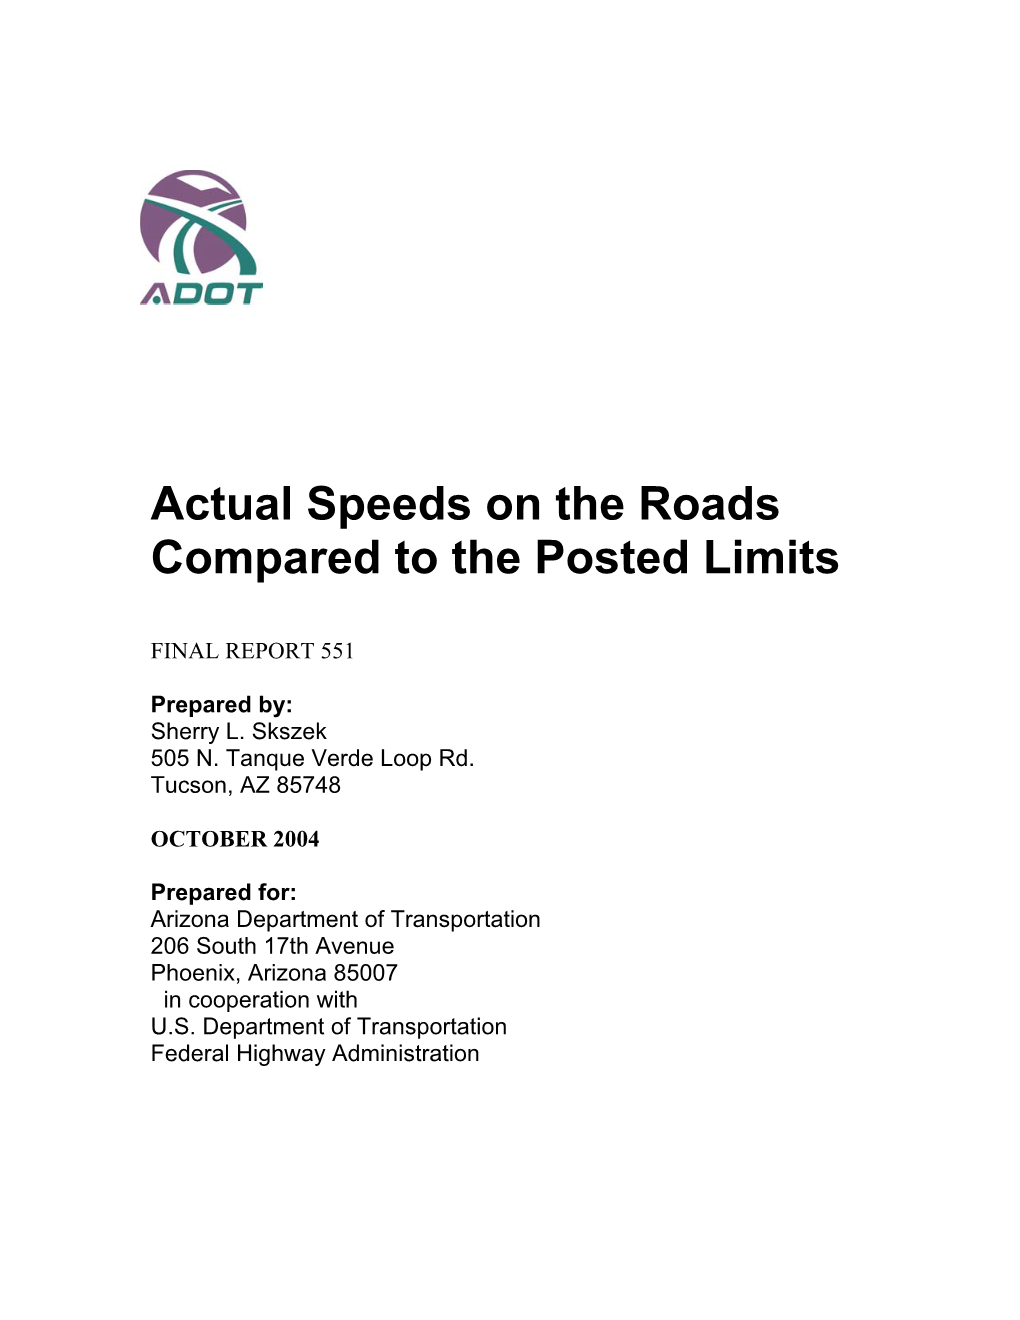 Actual Speeds on the Roads Compared to the Posted Limits